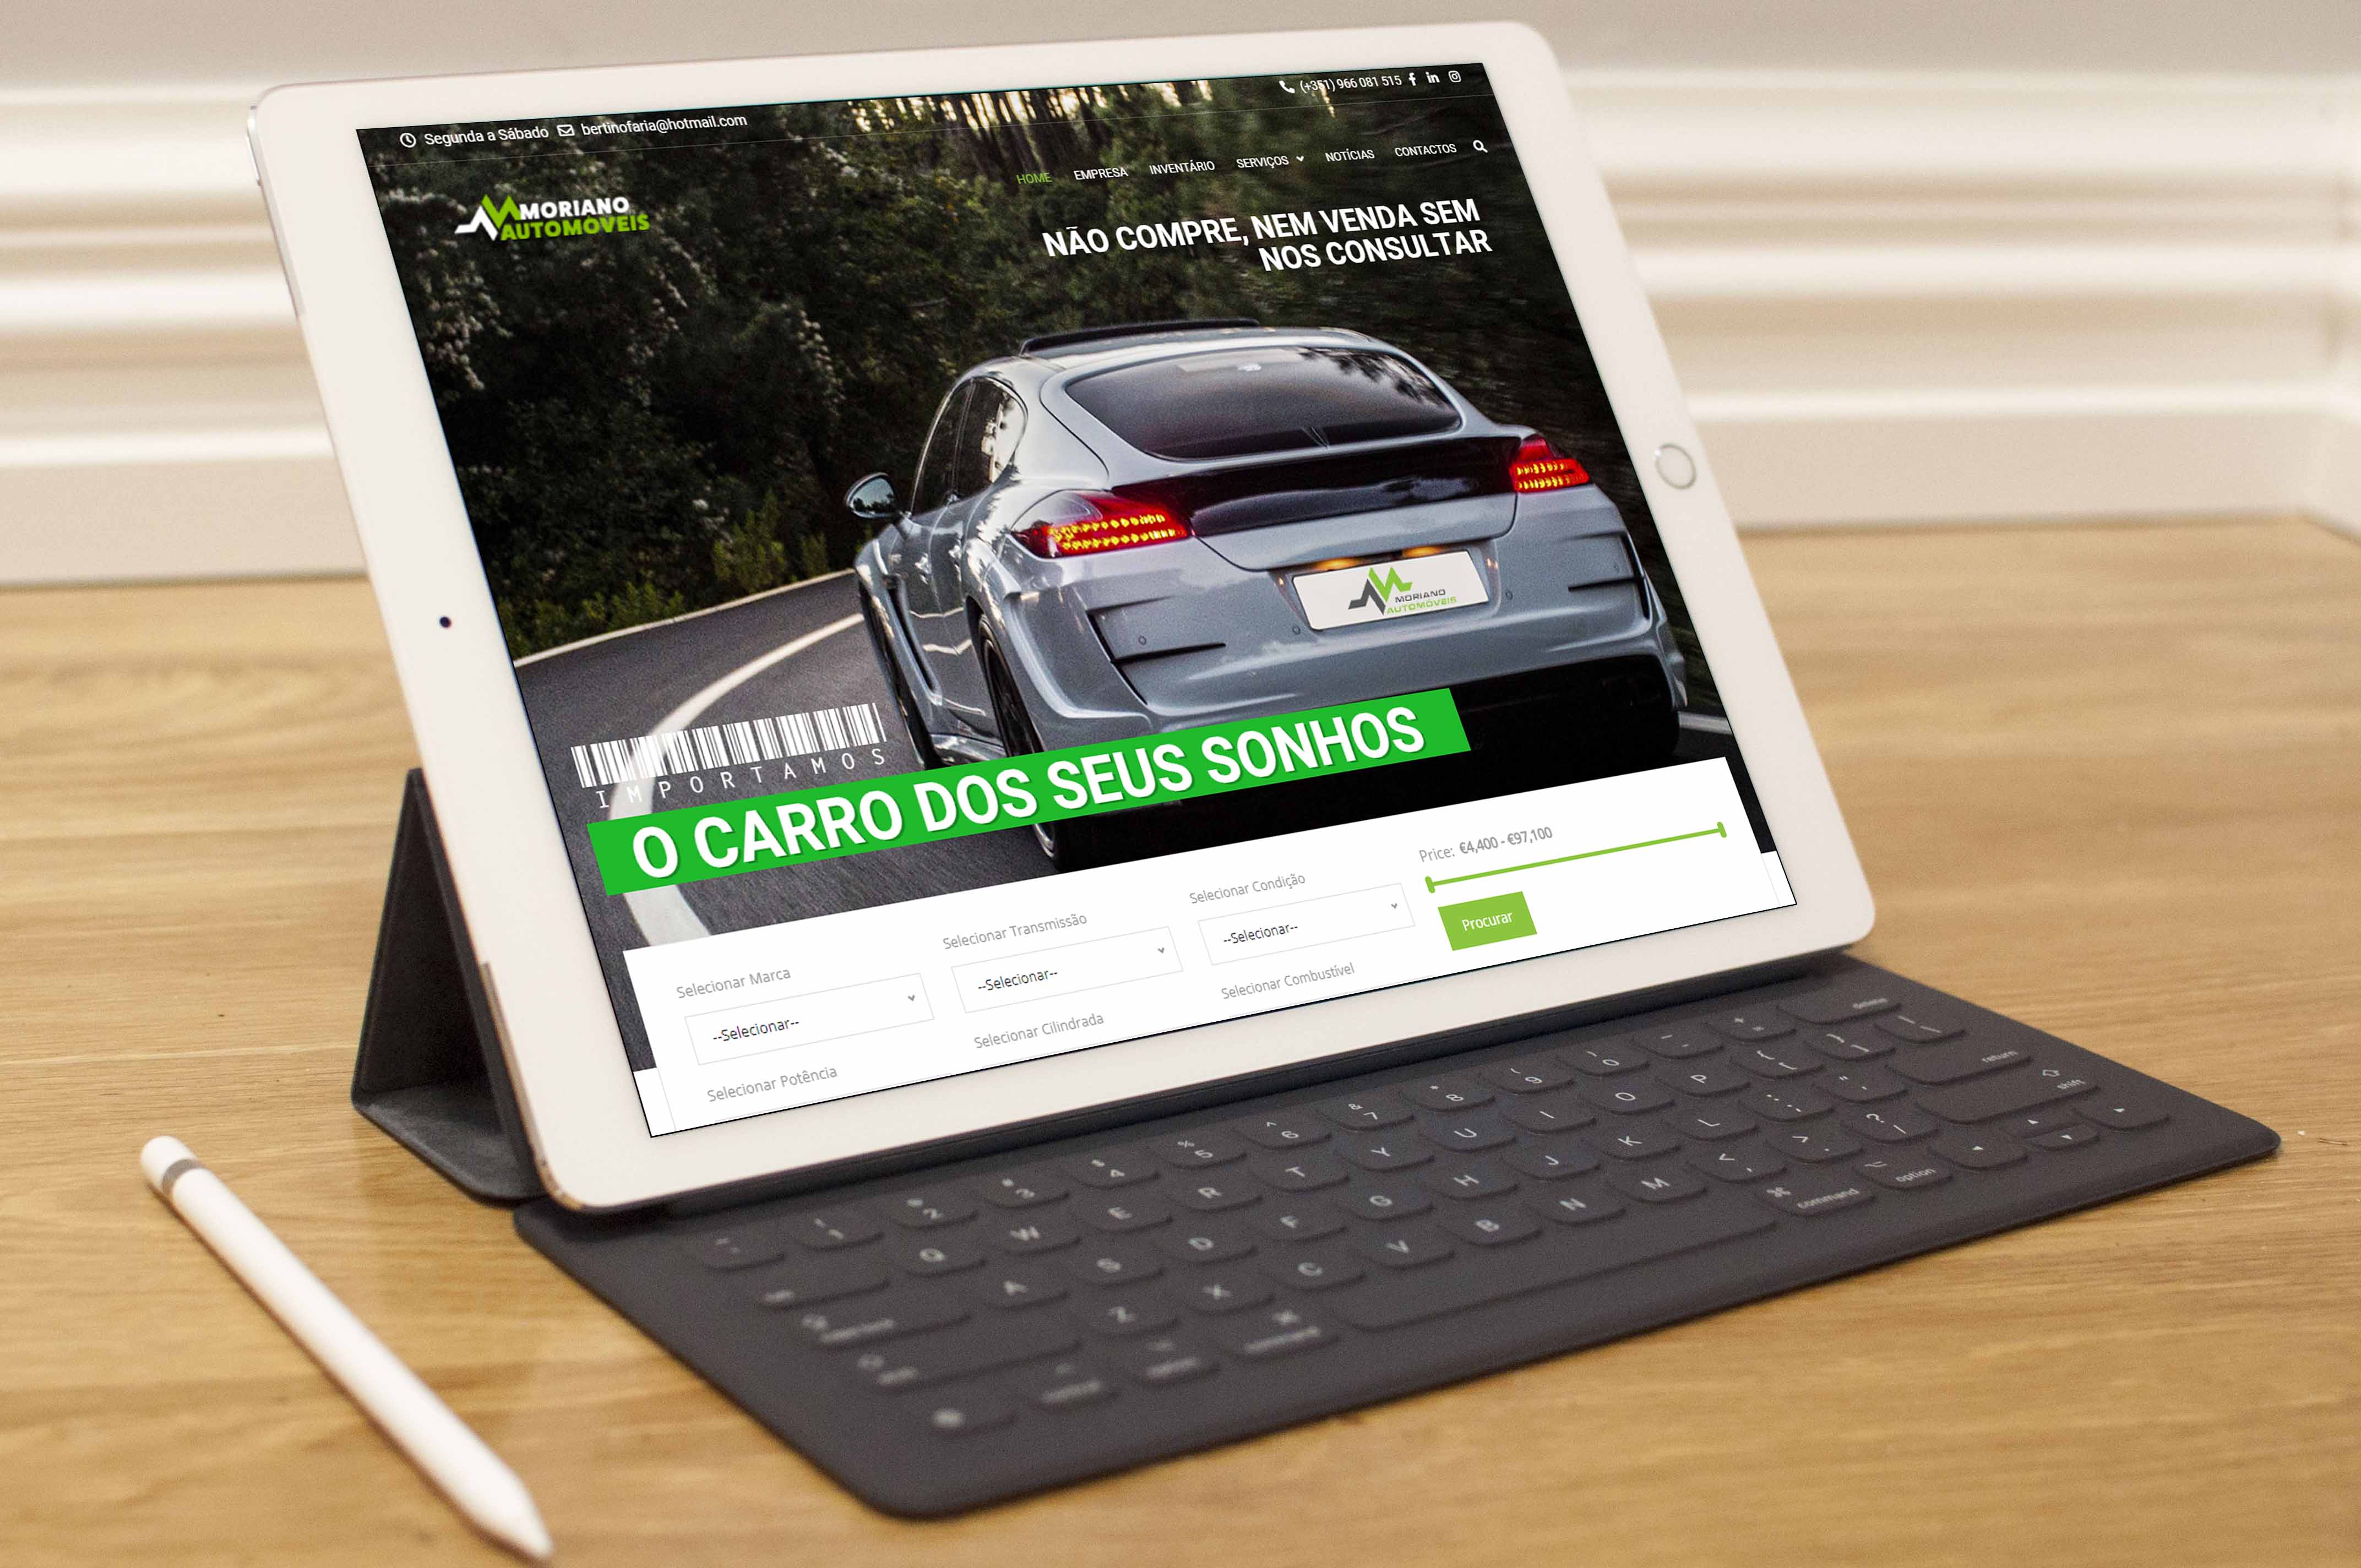 layout-moriano-automoveis-website-stand-automovel-vproductions